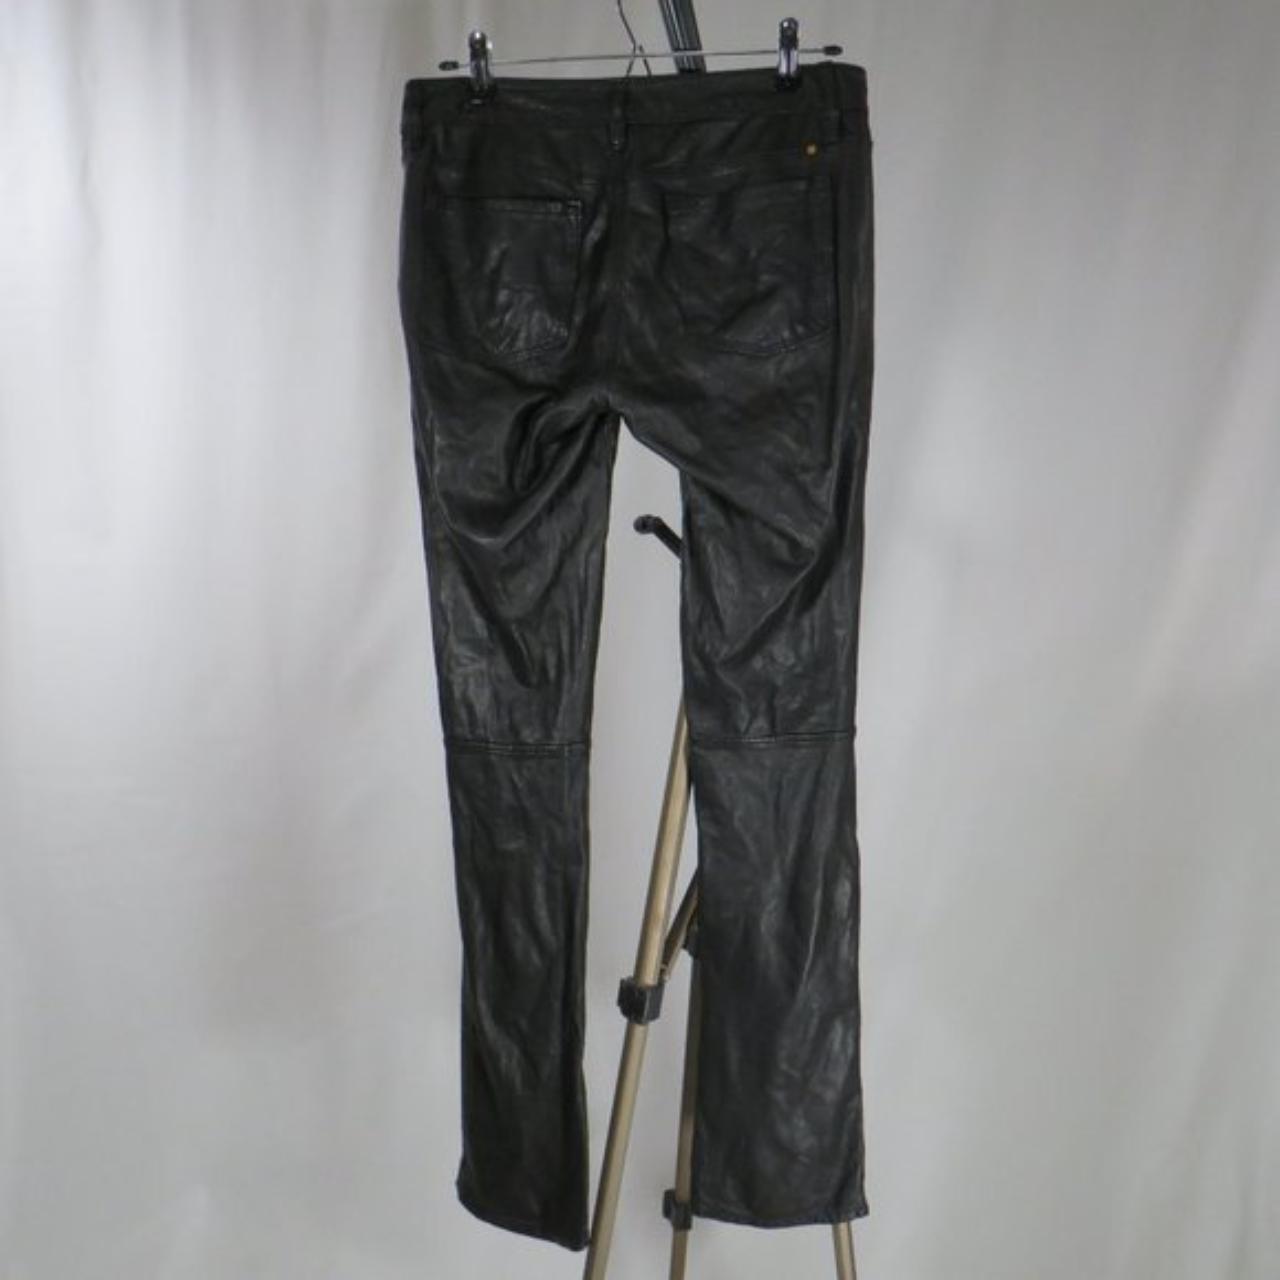 Rare vintage Lucky Brand black leather pants with... - Depop